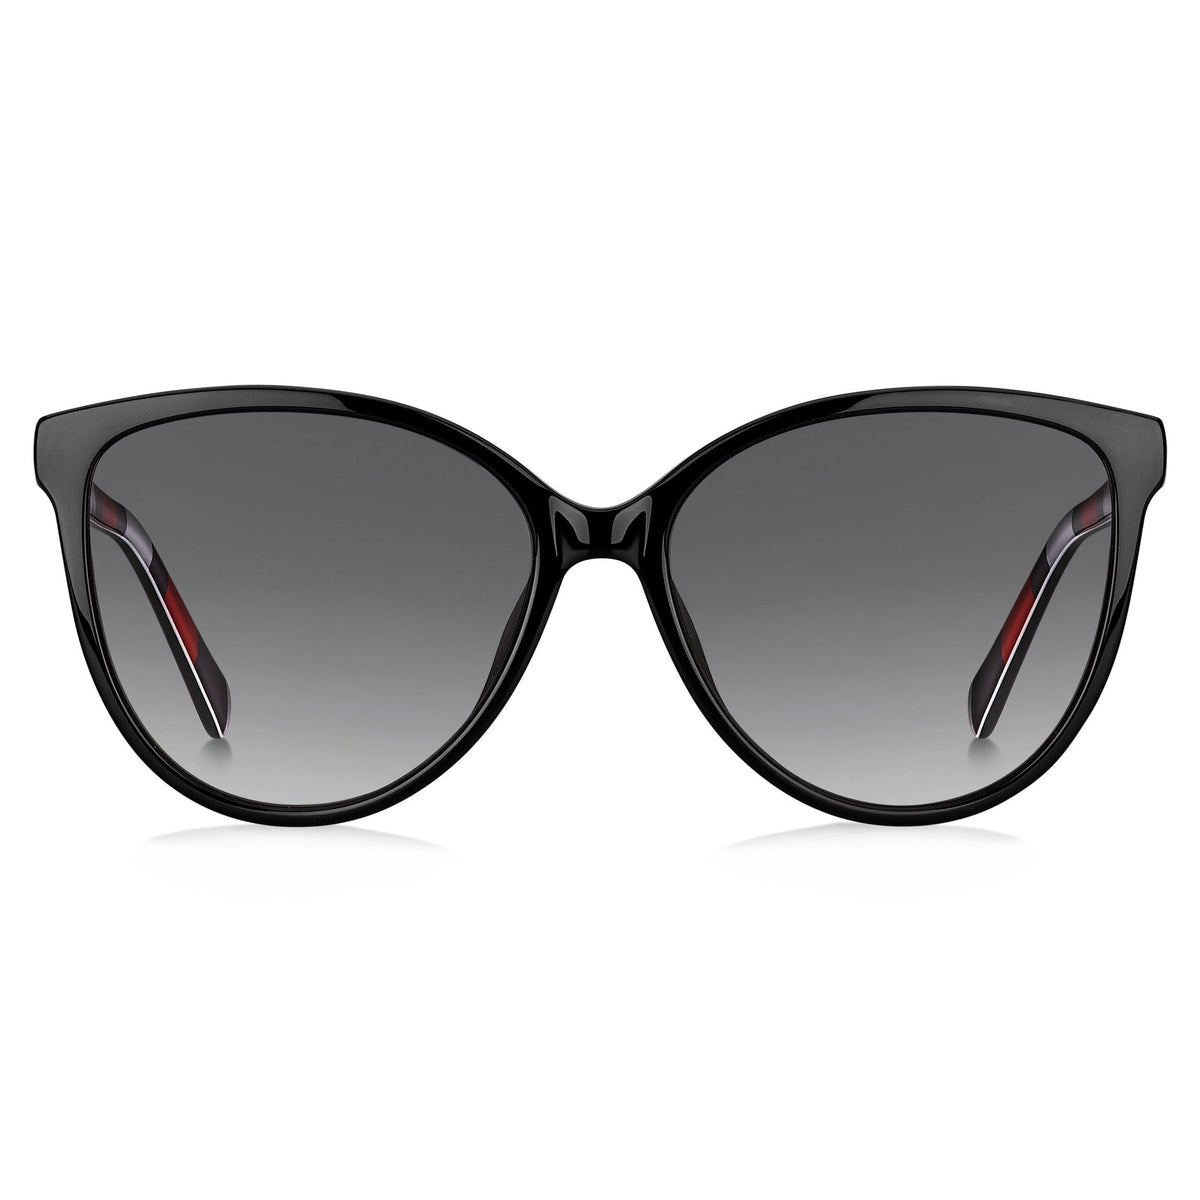 Tommy Hilfiger TH 1670/S 807 579O Unisex Black Sunglasses from